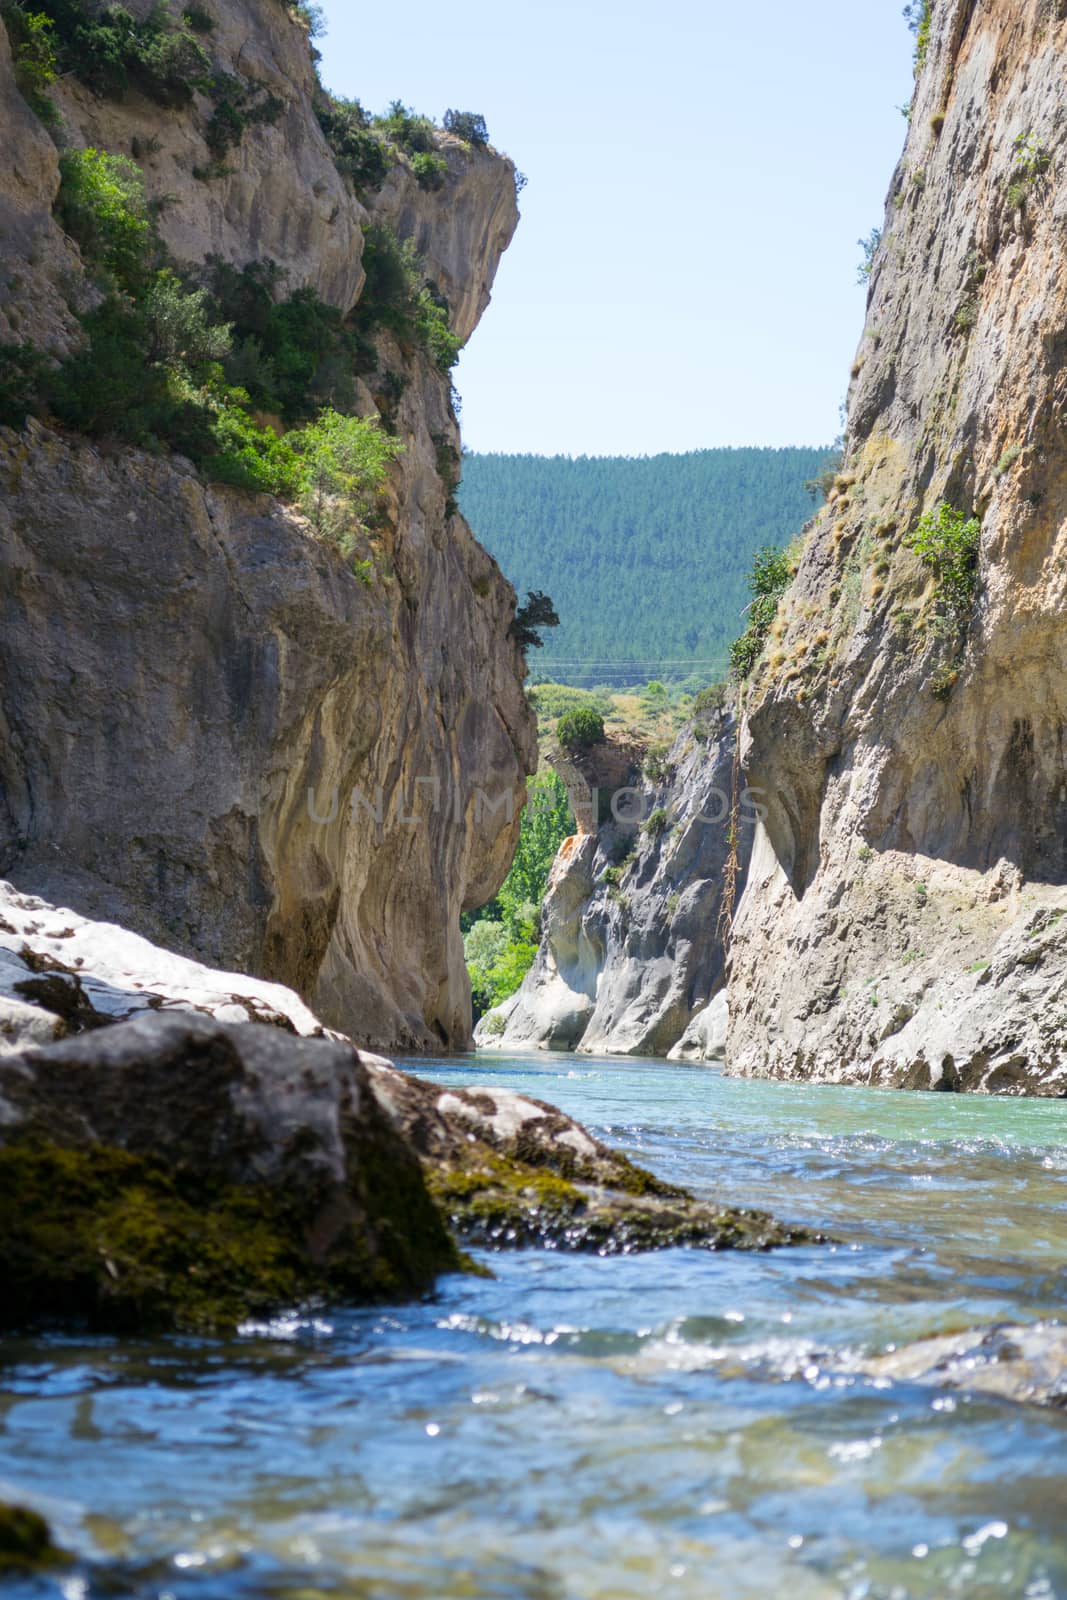 Lumbier gorge, located in Navarre (Spain), was carved by the Irati river in limestone